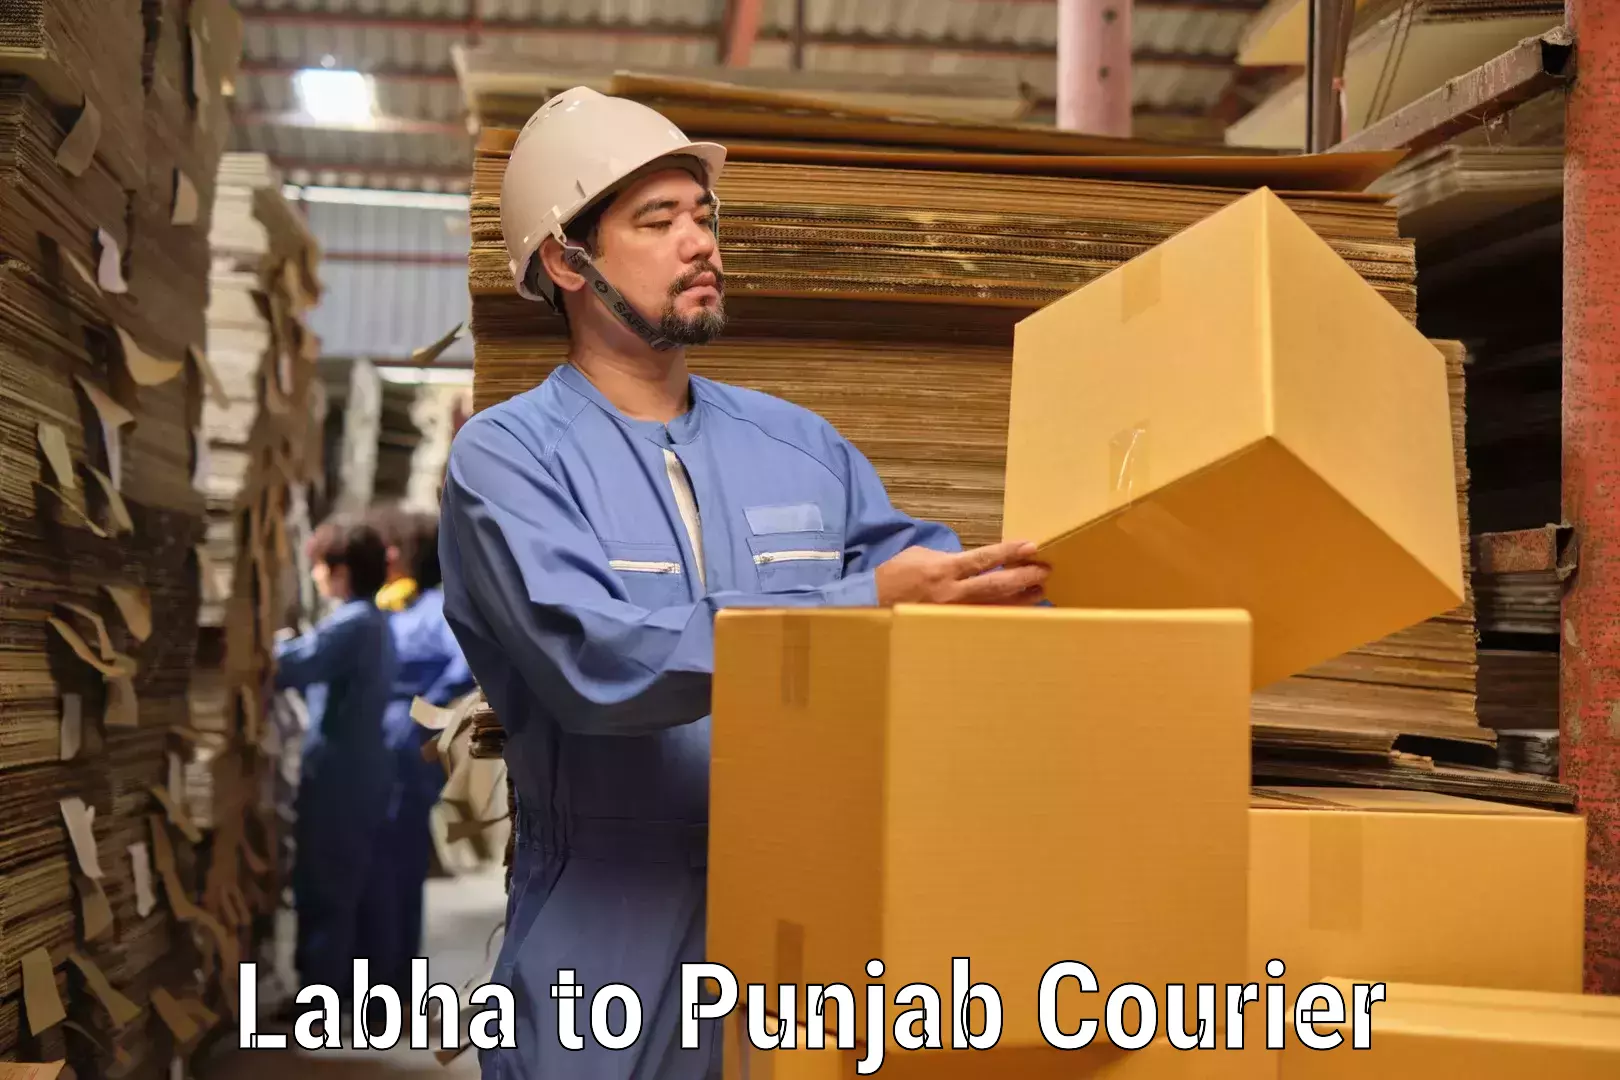 Courier app Labha to Pathankot